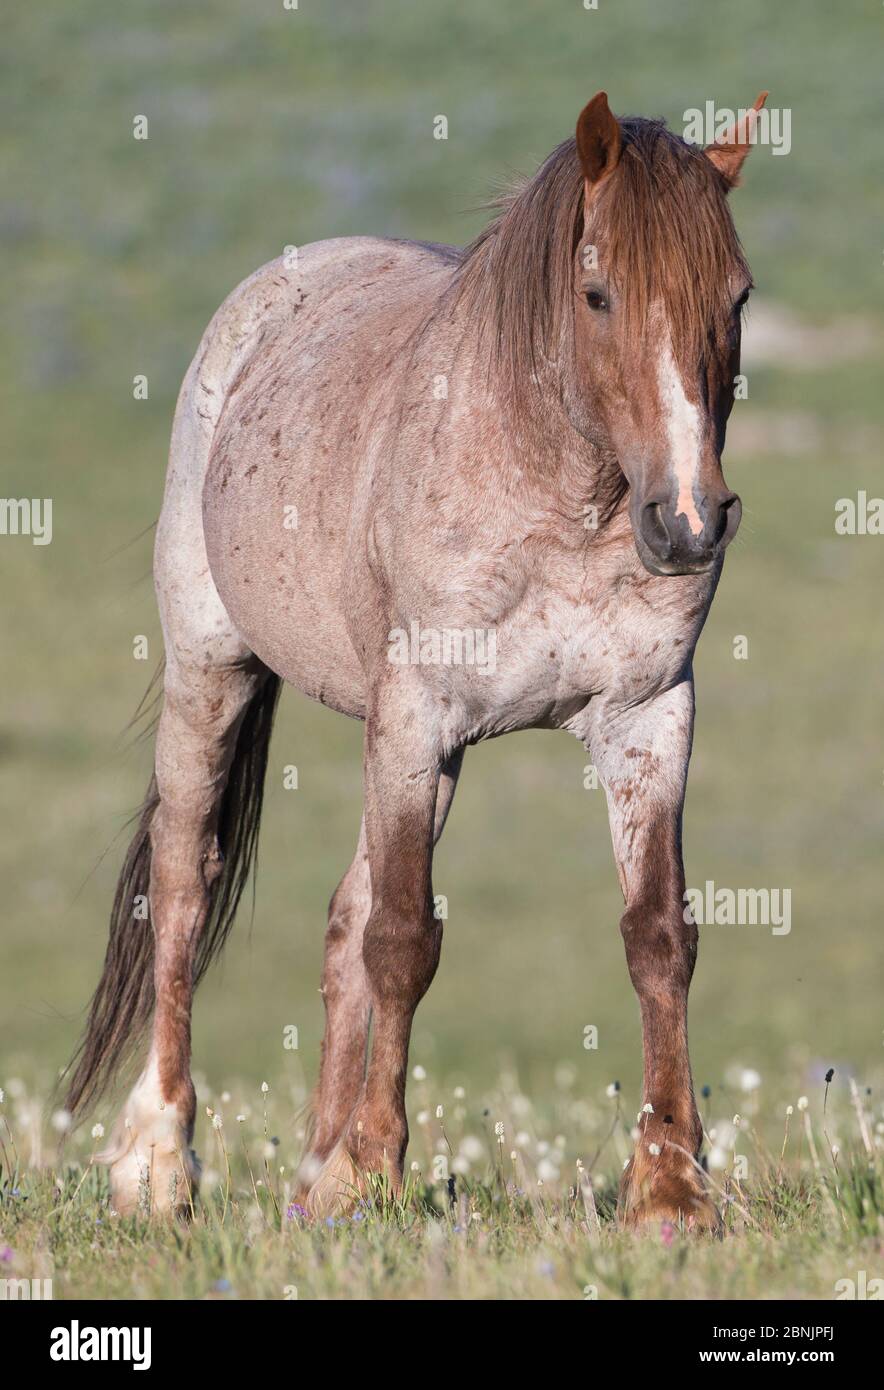 Wild red stallion in Stock the Mountains, USA. Pryor Alamy Montana, roan Mustang Photo - June